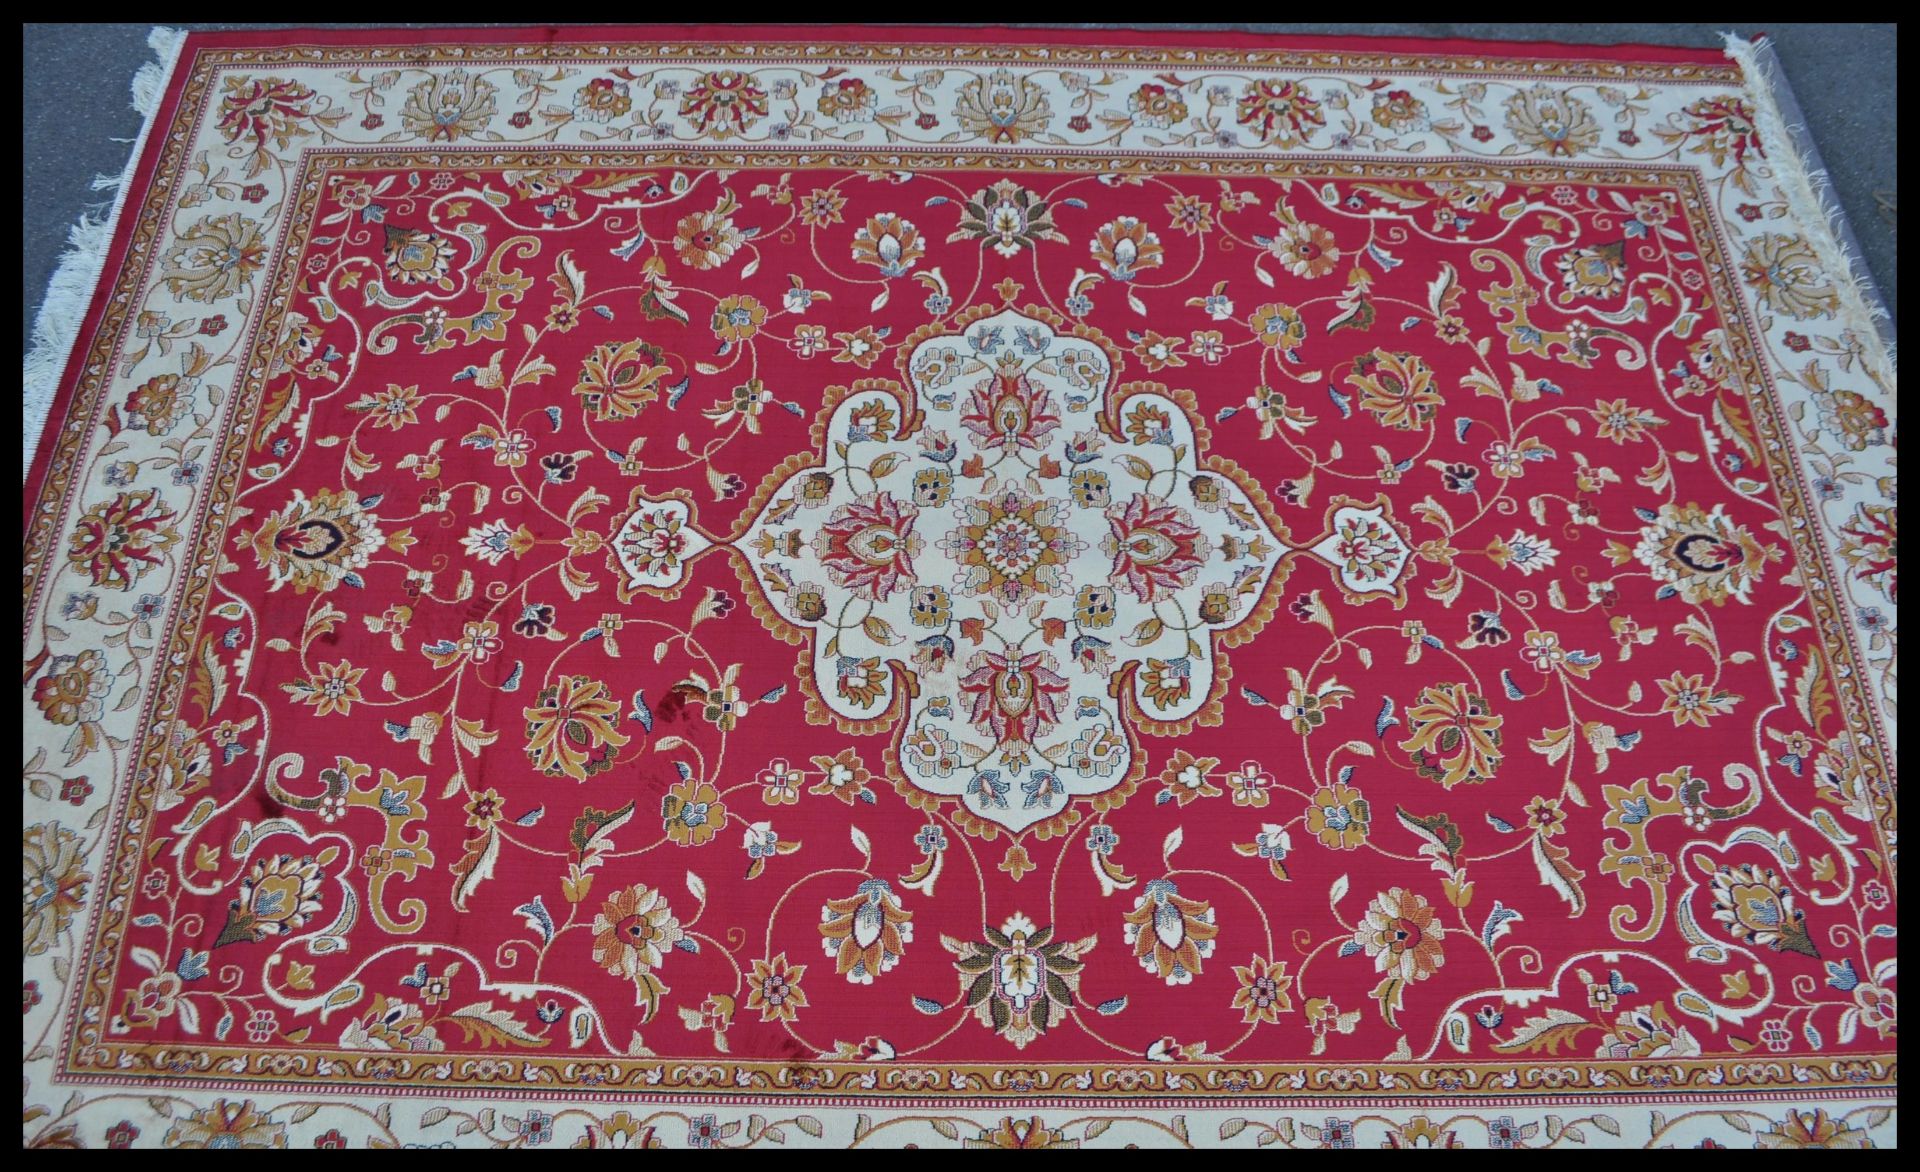 A 20th Century Bokhara Persian Islamic rug having a beige ground with red geometric patterned